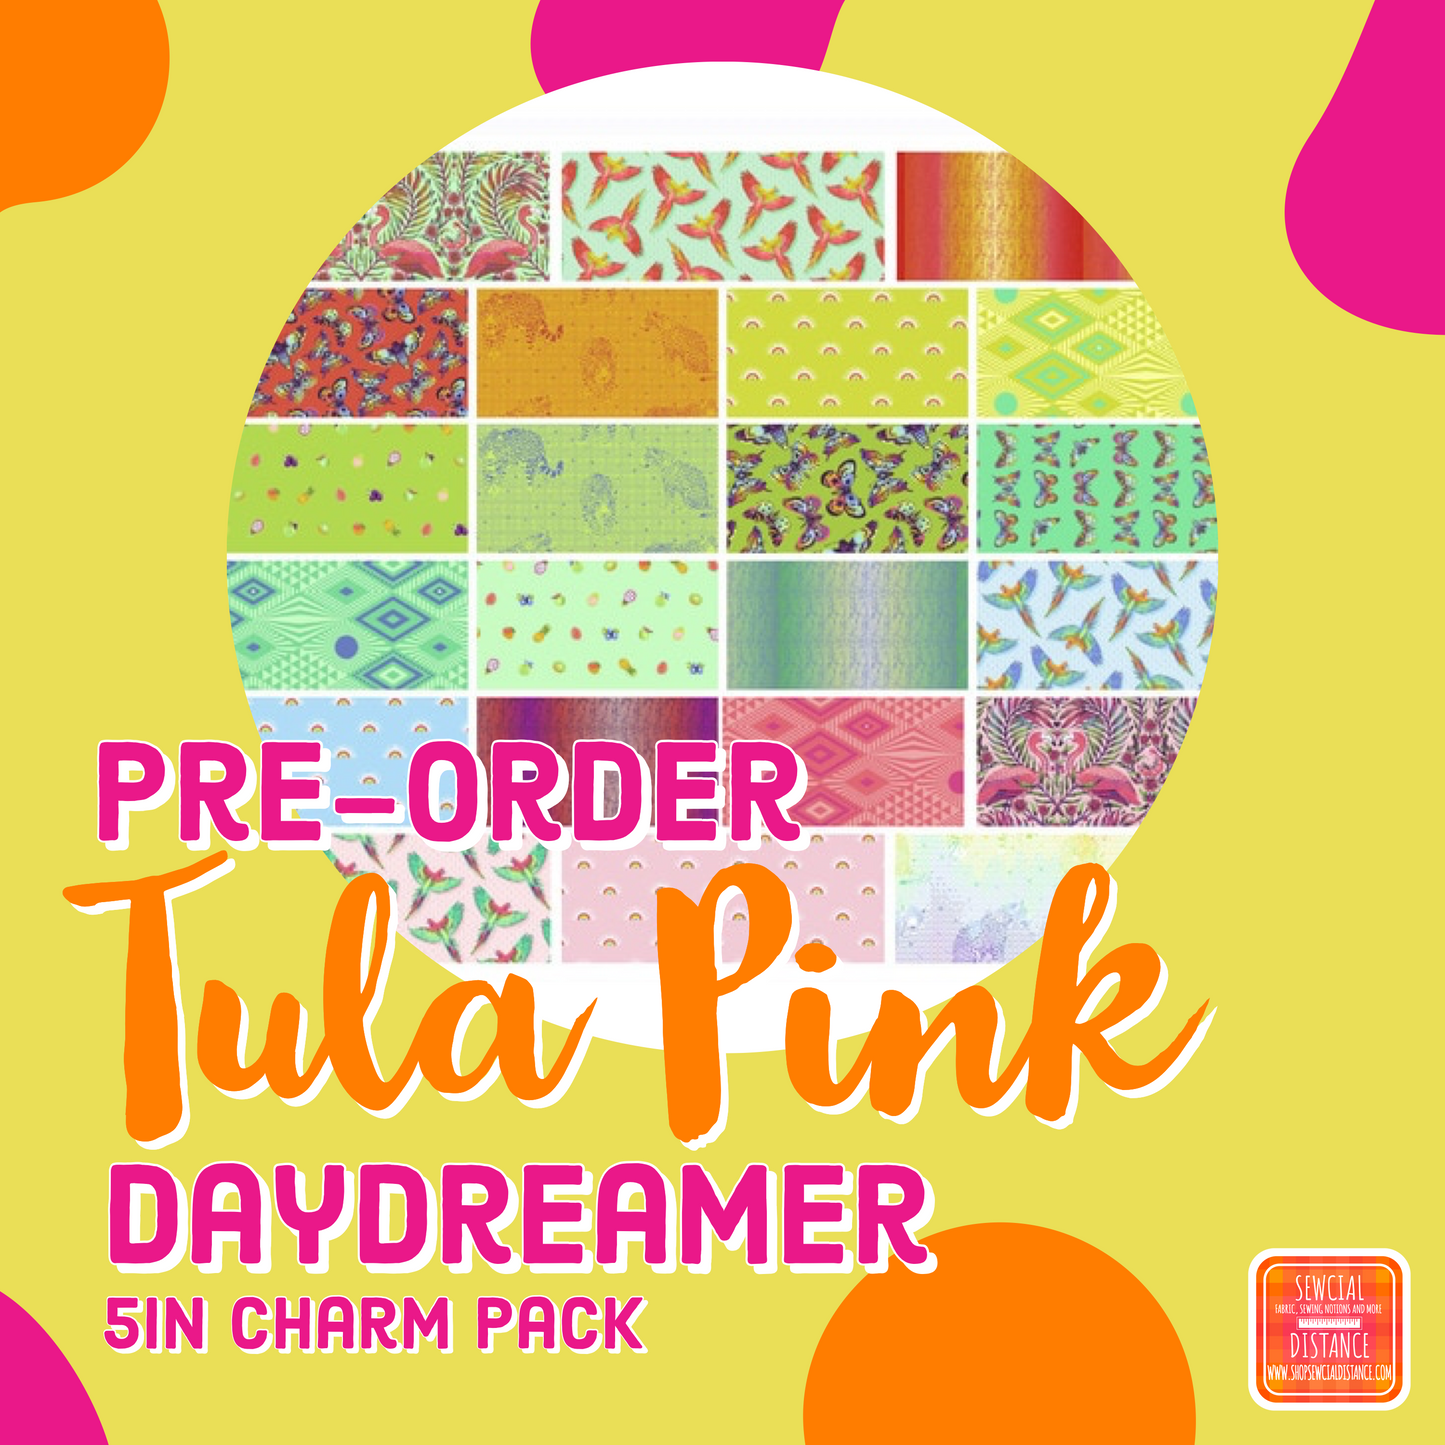 Tula Pink-Daydreamer-5in Charm Pack